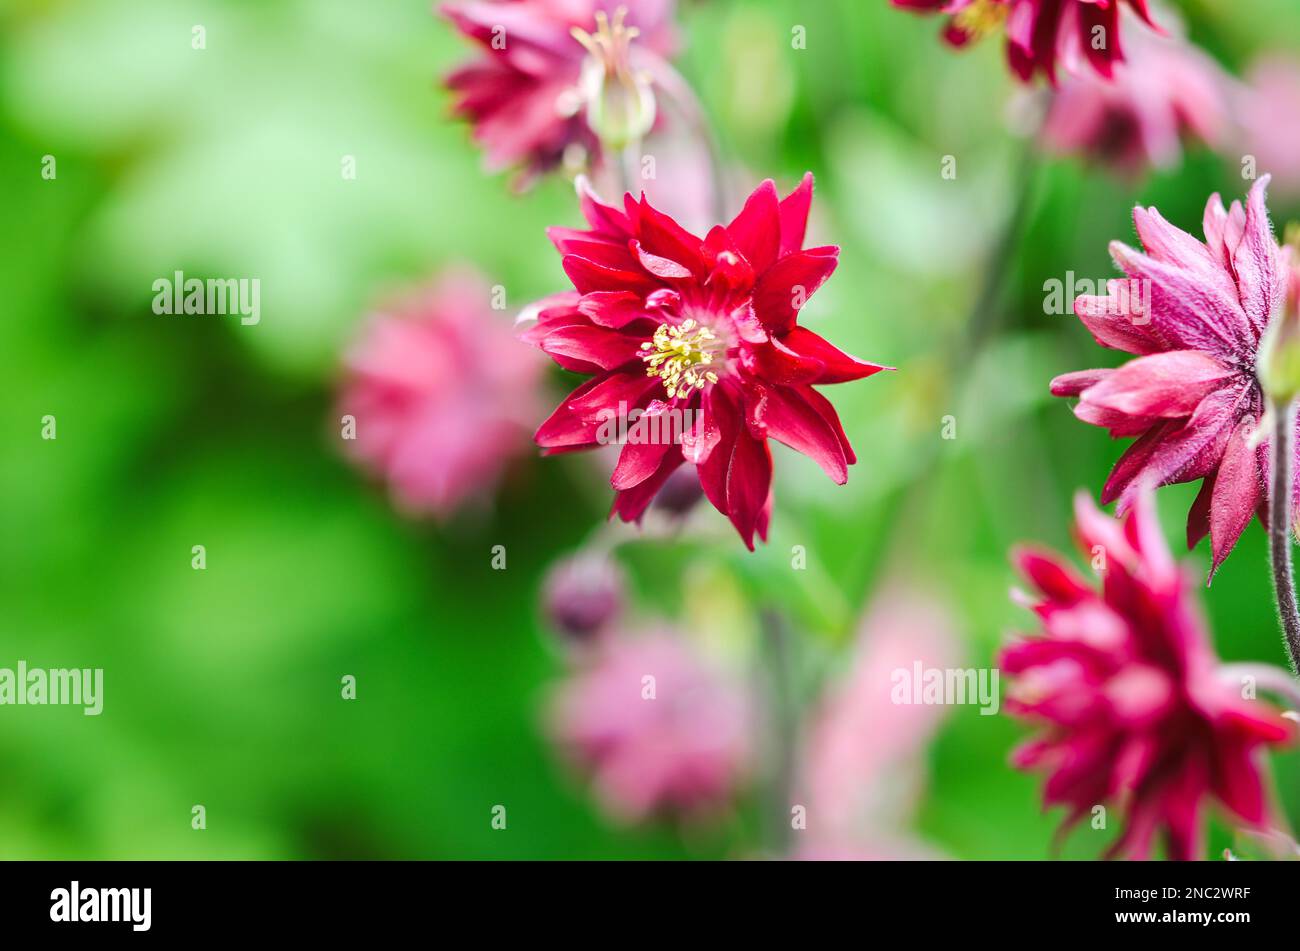 Beautiful Columbine or Aquilegia flowers in the flower garden. Selective focus with blurred background. Stock Photo